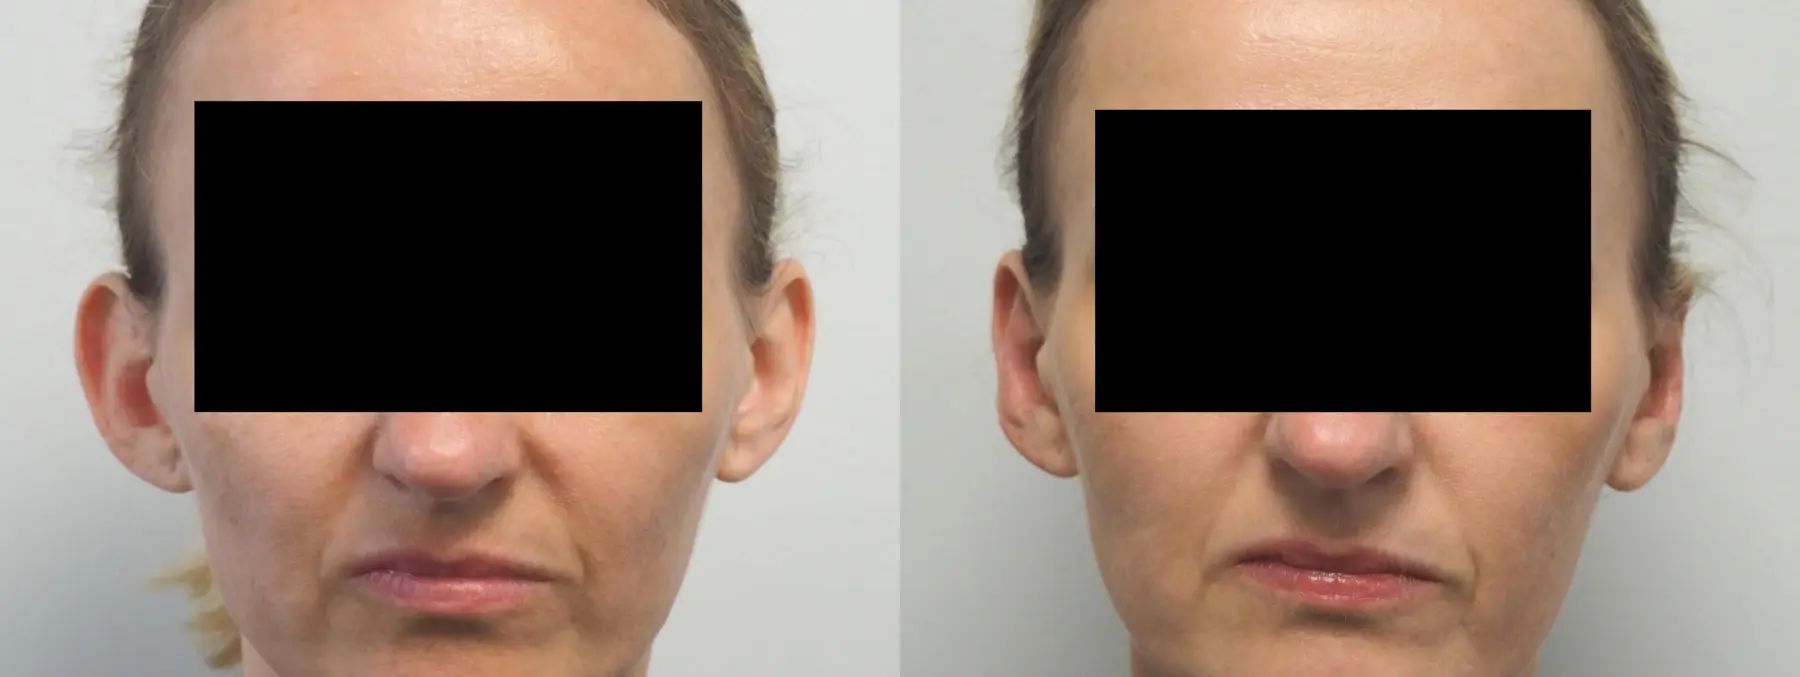 Otoplasty: Patient 3 - Before and After  